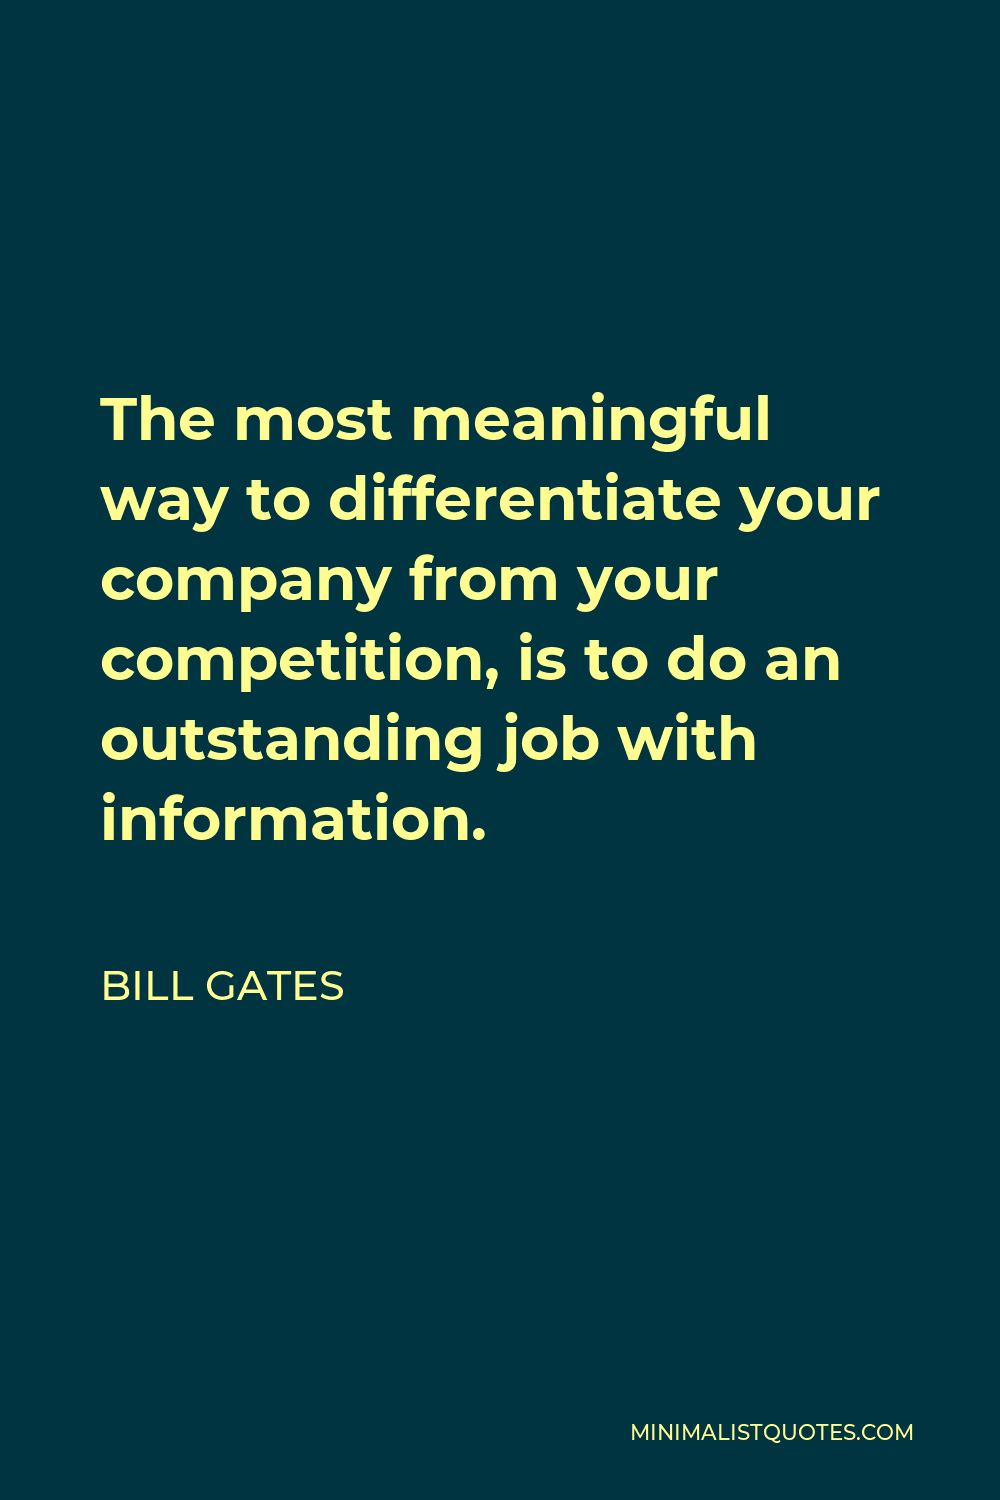 Bill Gates Quote - The most meaningful way to differentiate your company from your competition, is to do an outstanding job with information.